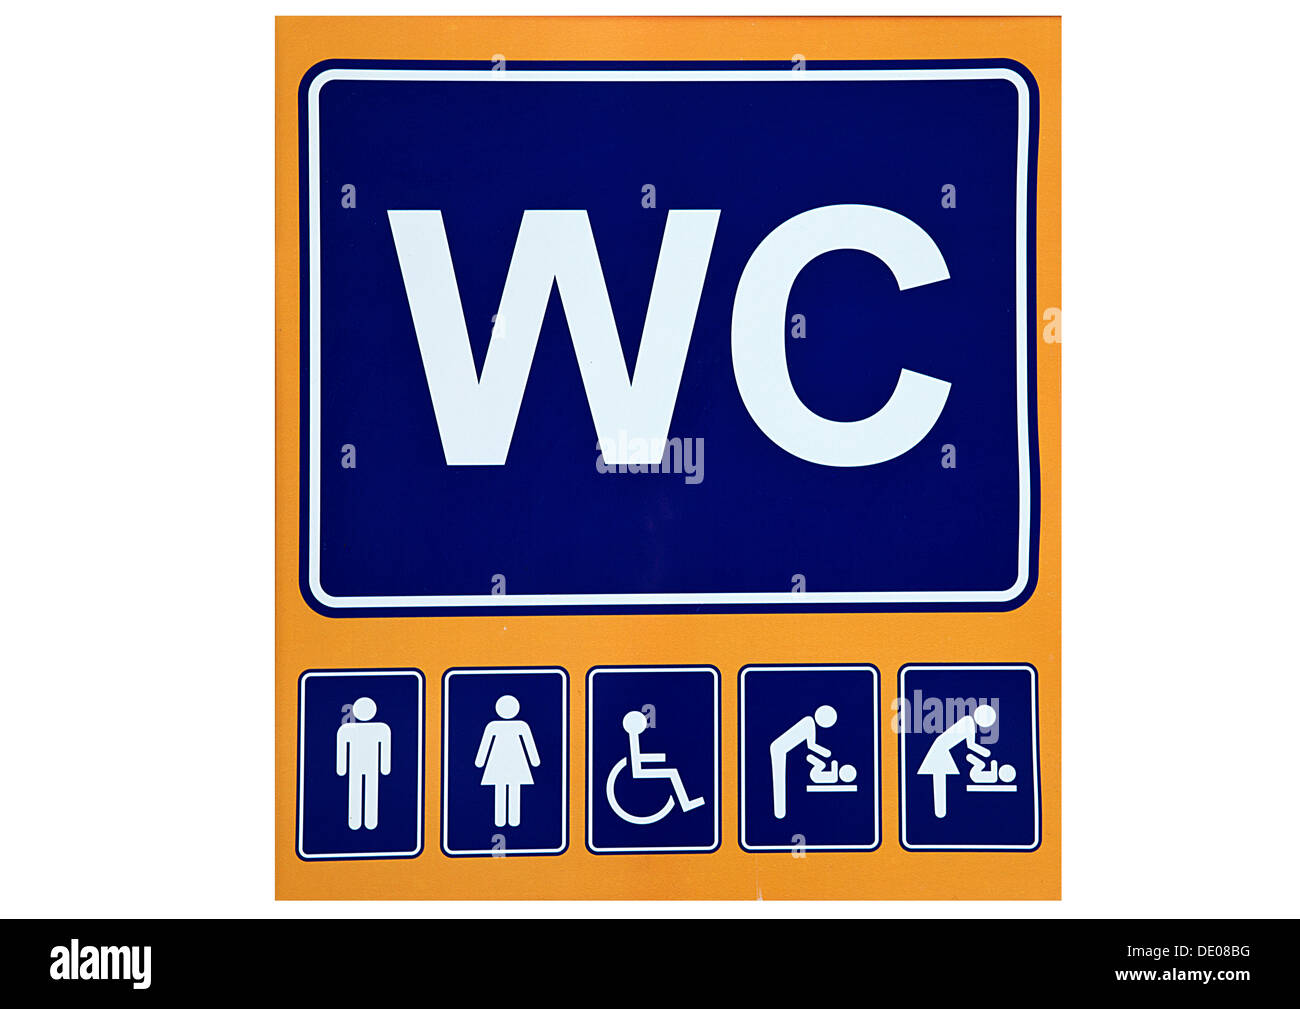 Baby changing facilities toilet sign